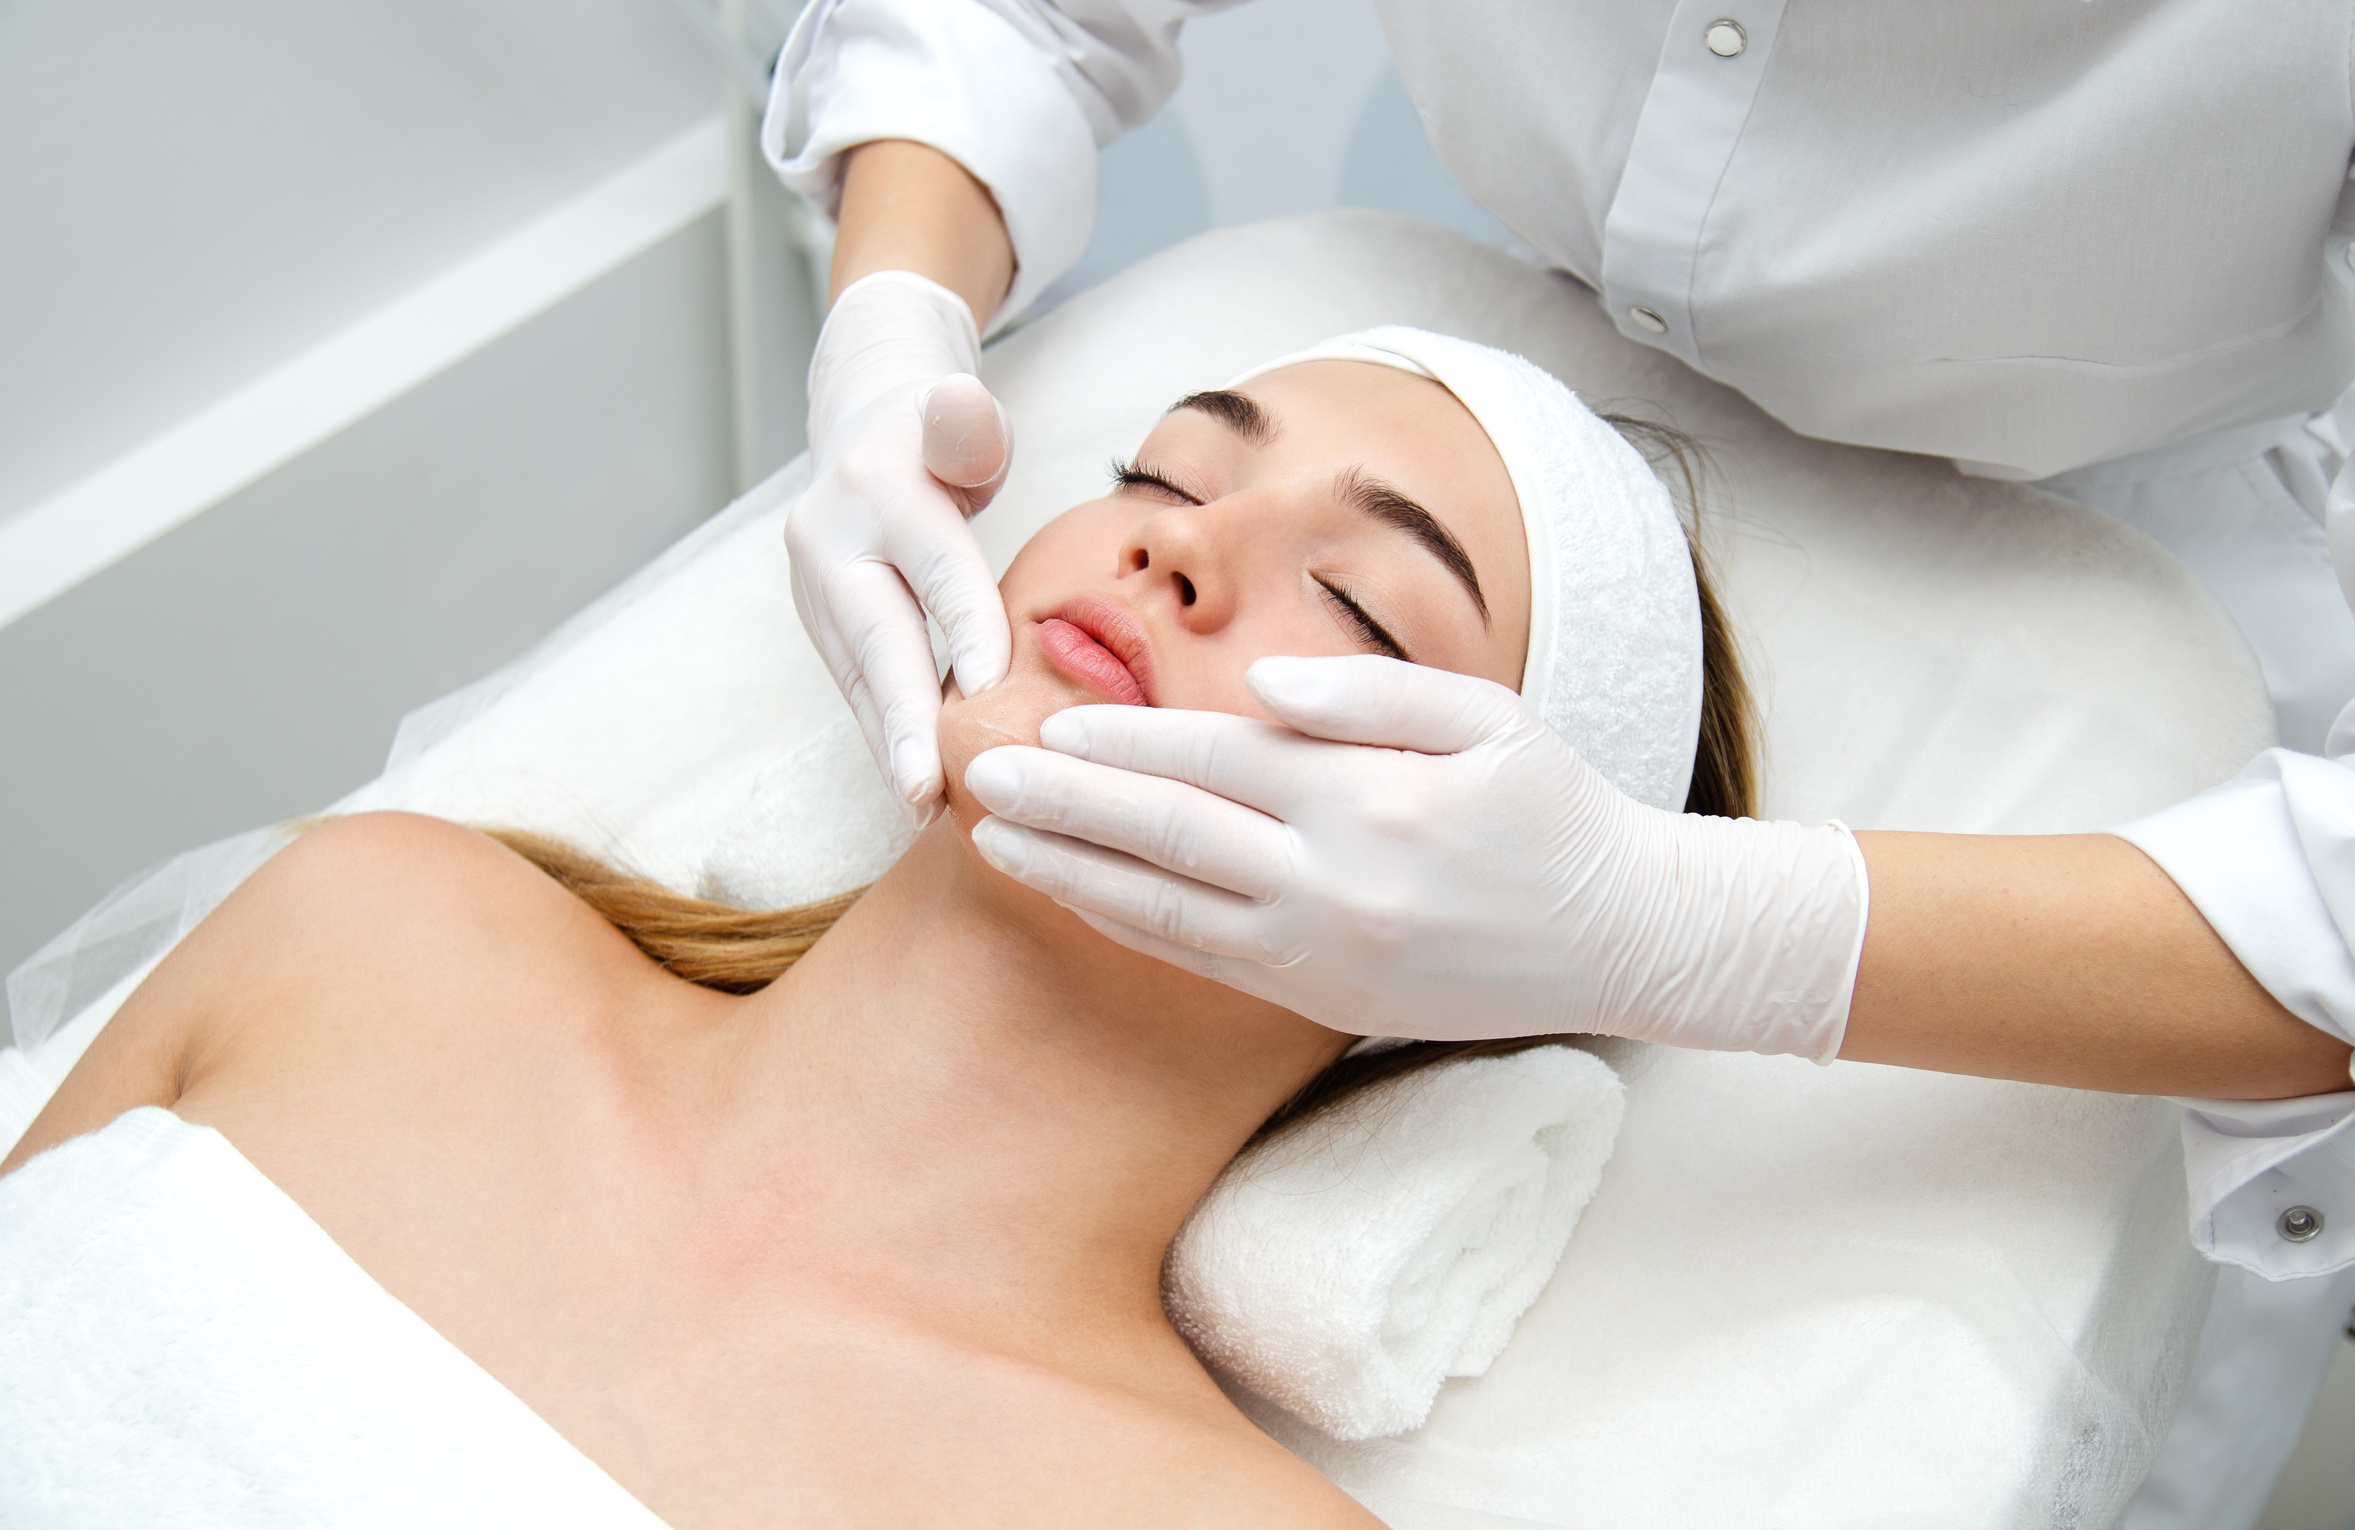 Woman getting face beauty treatment in medical spa center. Skin rejuvenation